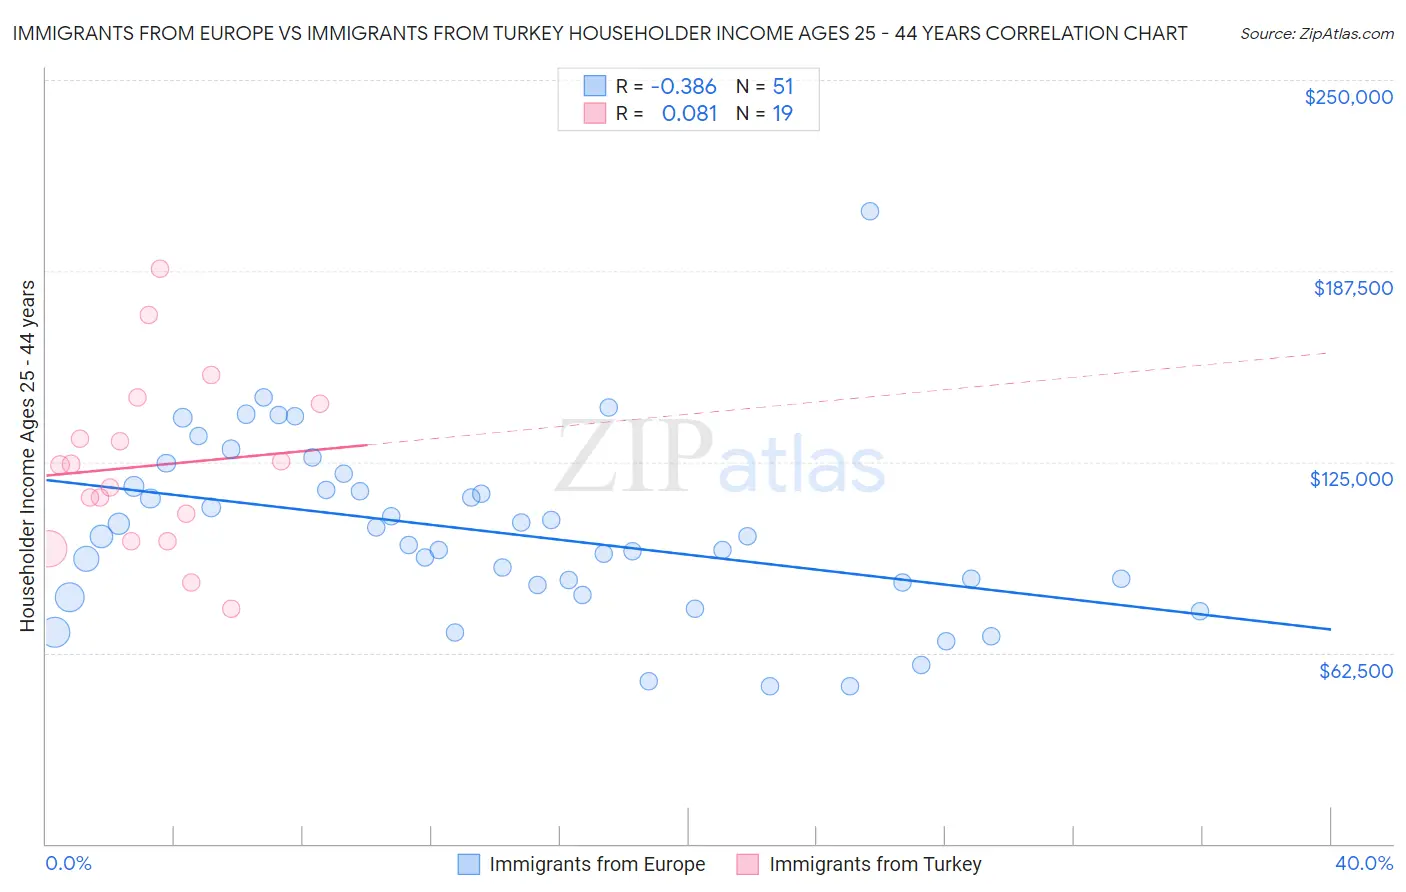 Immigrants from Europe vs Immigrants from Turkey Householder Income Ages 25 - 44 years